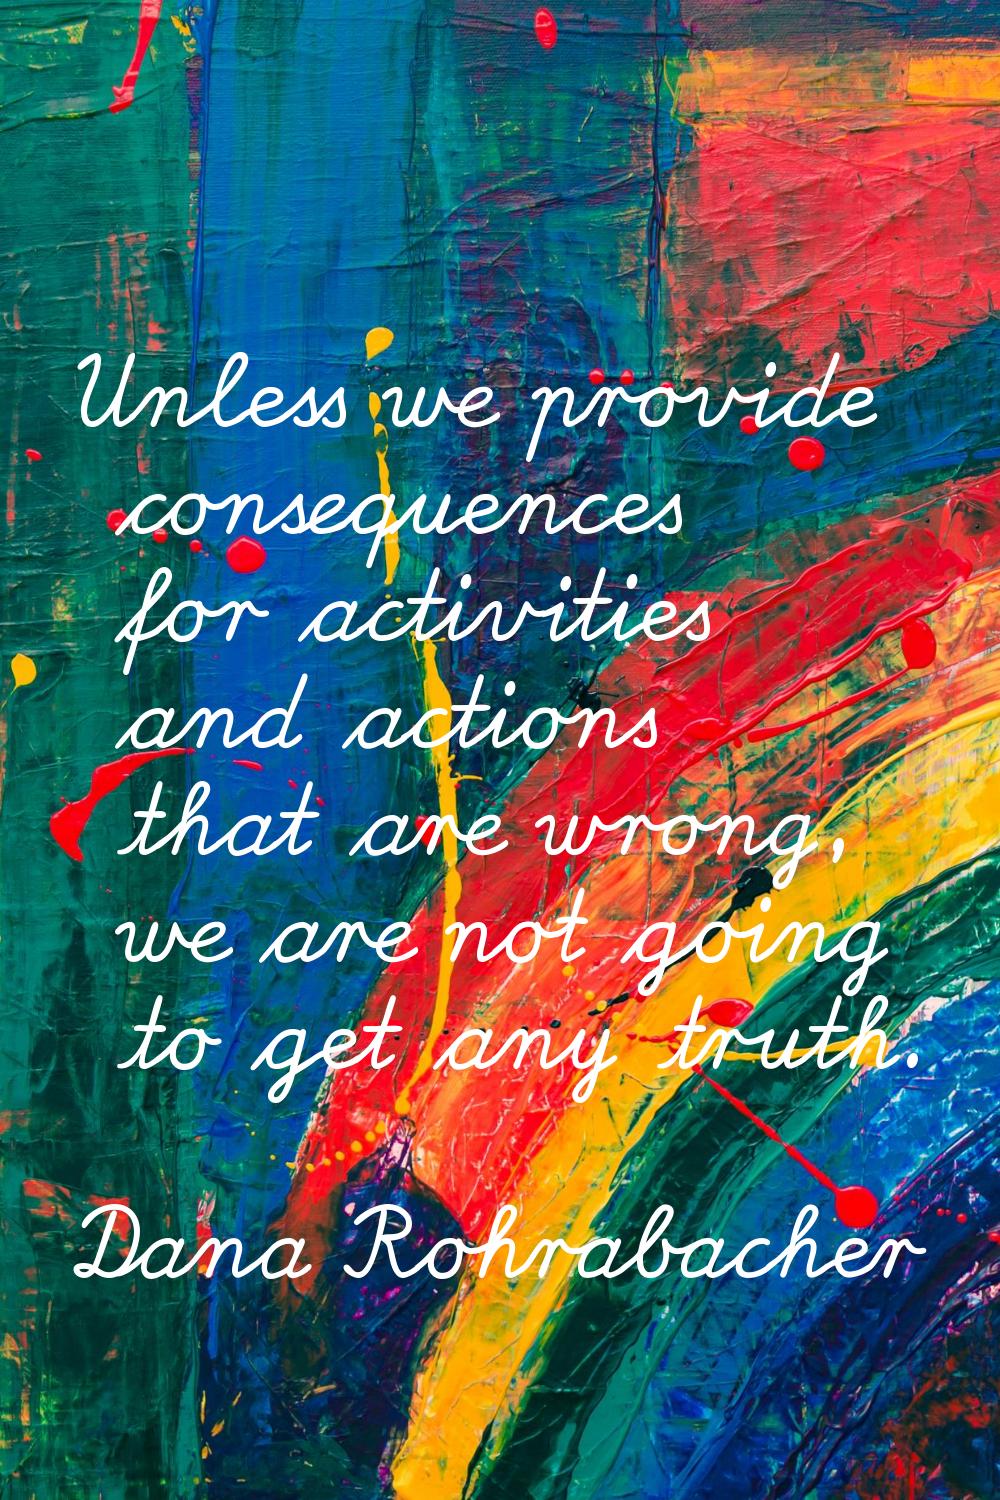 Unless we provide consequences for activities and actions that are wrong, we are not going to get a